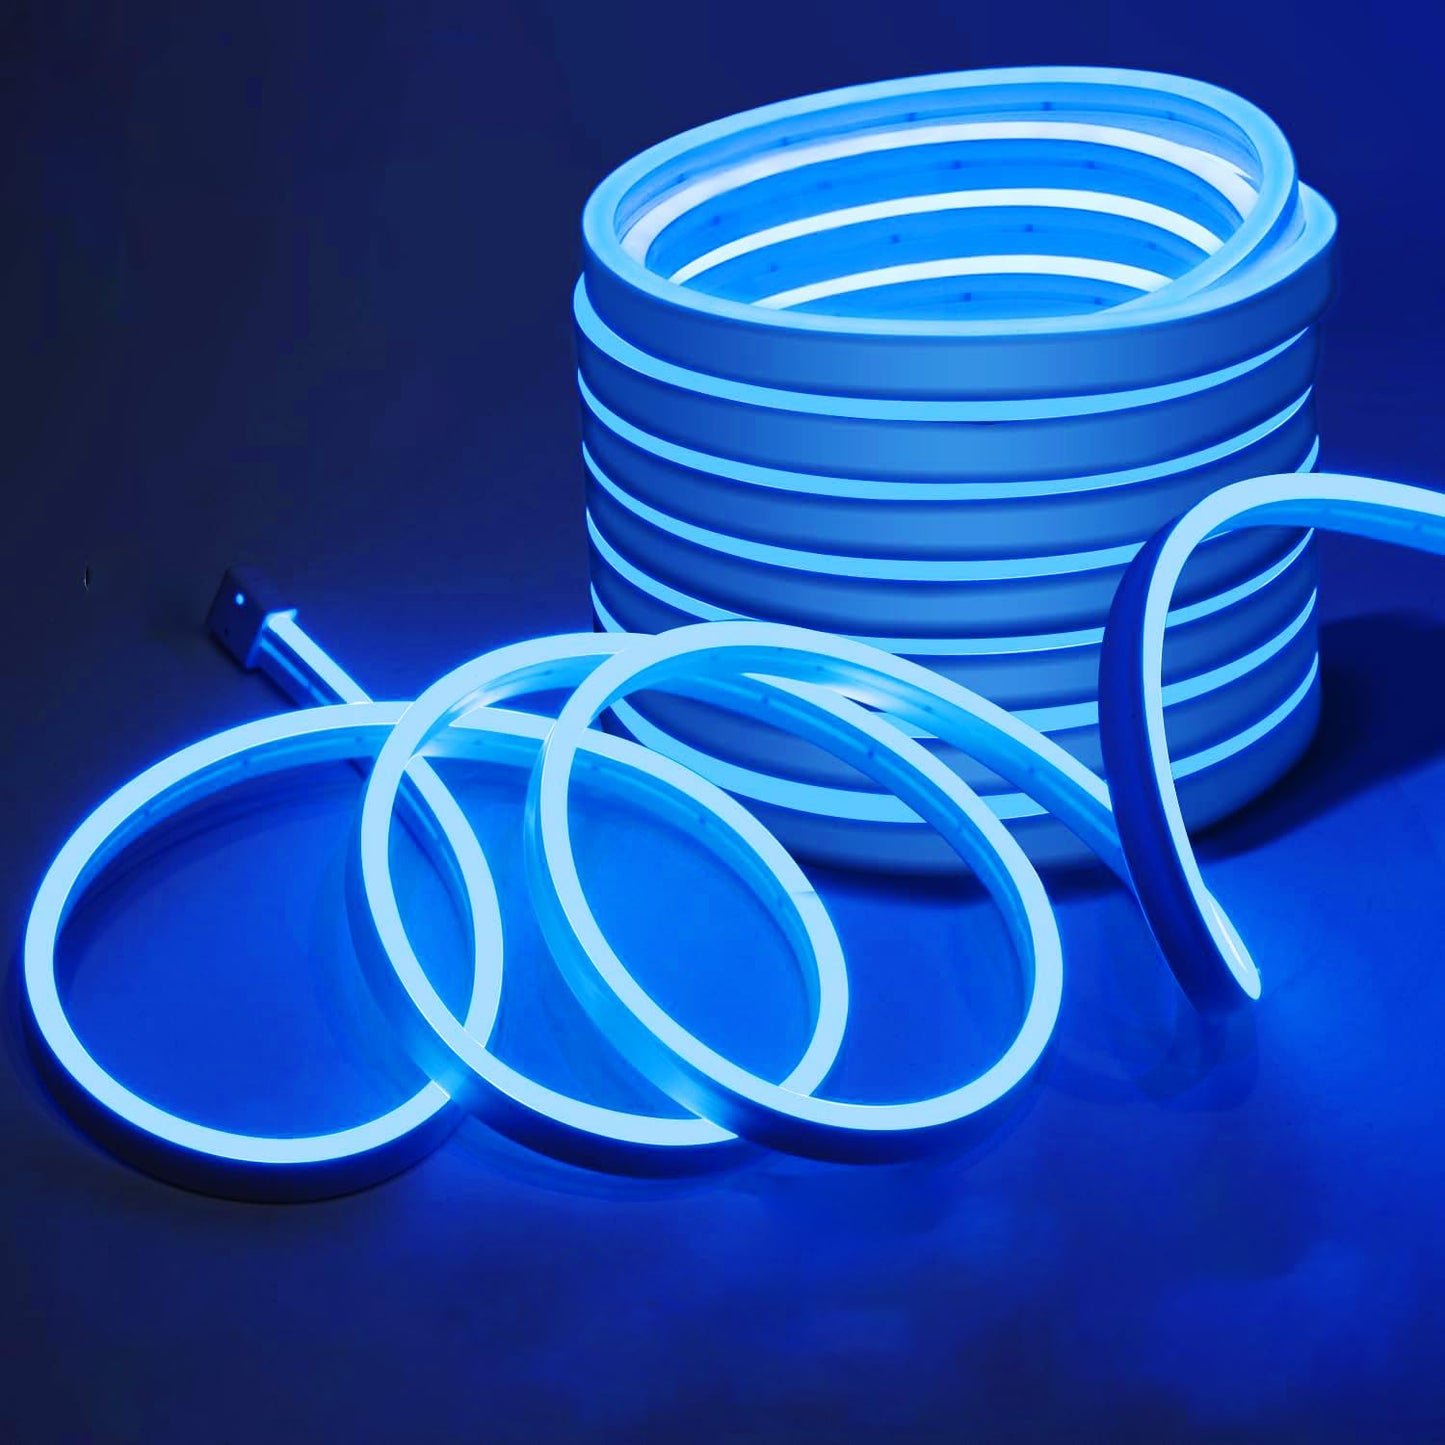 5 Mtr High Glow Neon Strip Light 24V Waterproof Flexible Silicon Neon Light for Wall, Indoor, Outdoors Decor DIY, Diwali Decoration Lights (Blue)